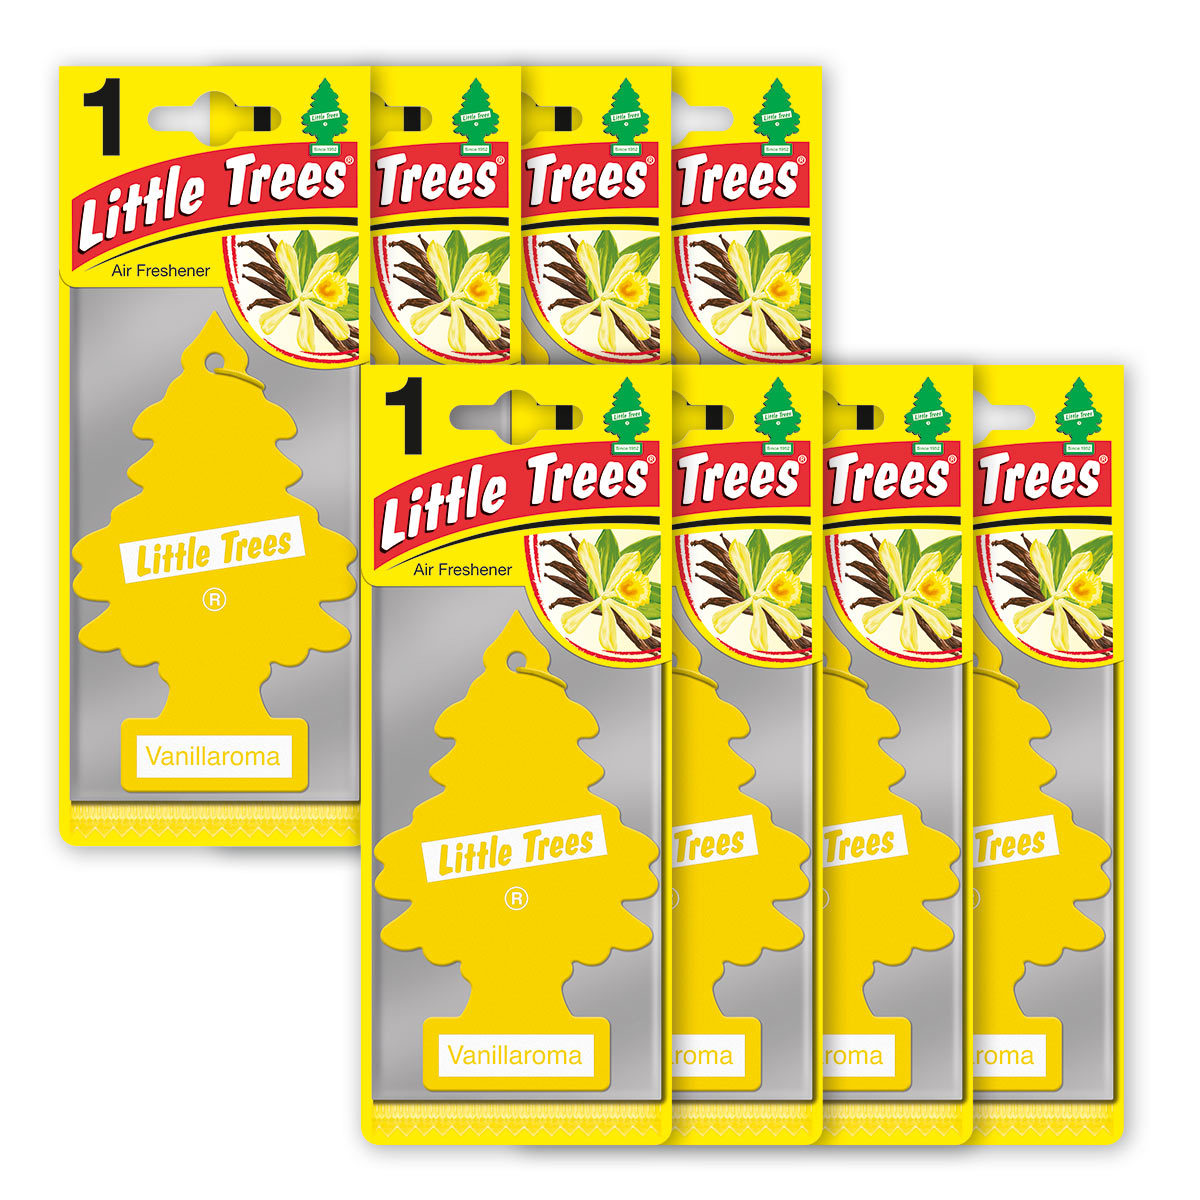 Little Trees Traditional Assortment Air Fresheners 24 Pack